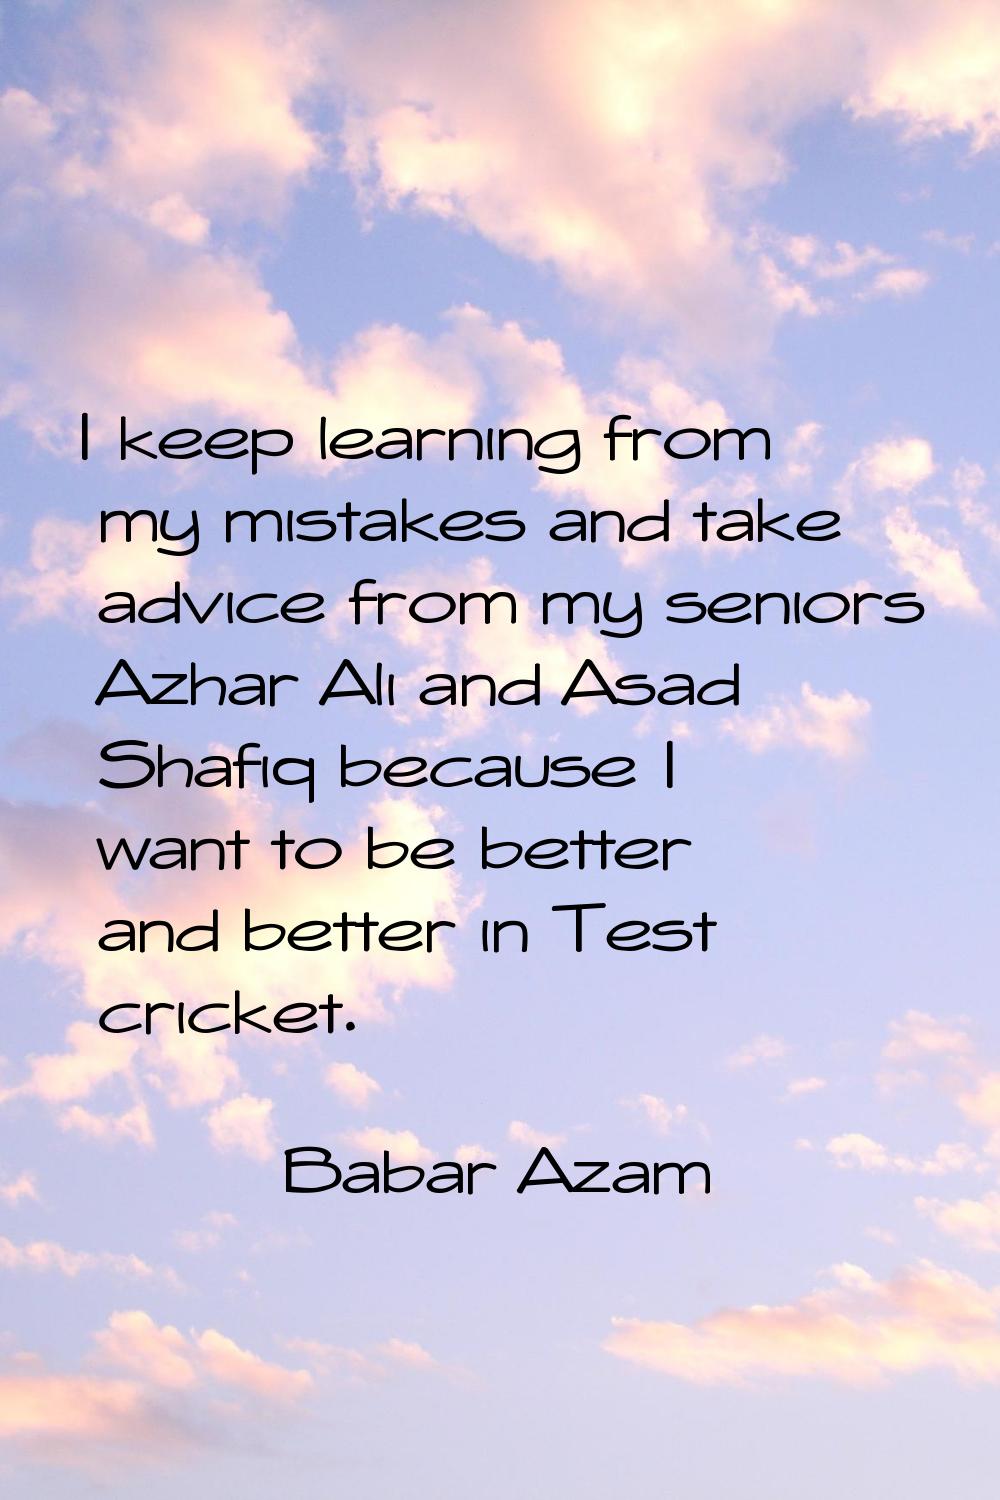 I keep learning from my mistakes and take advice from my seniors Azhar Ali and Asad Shafiq because 